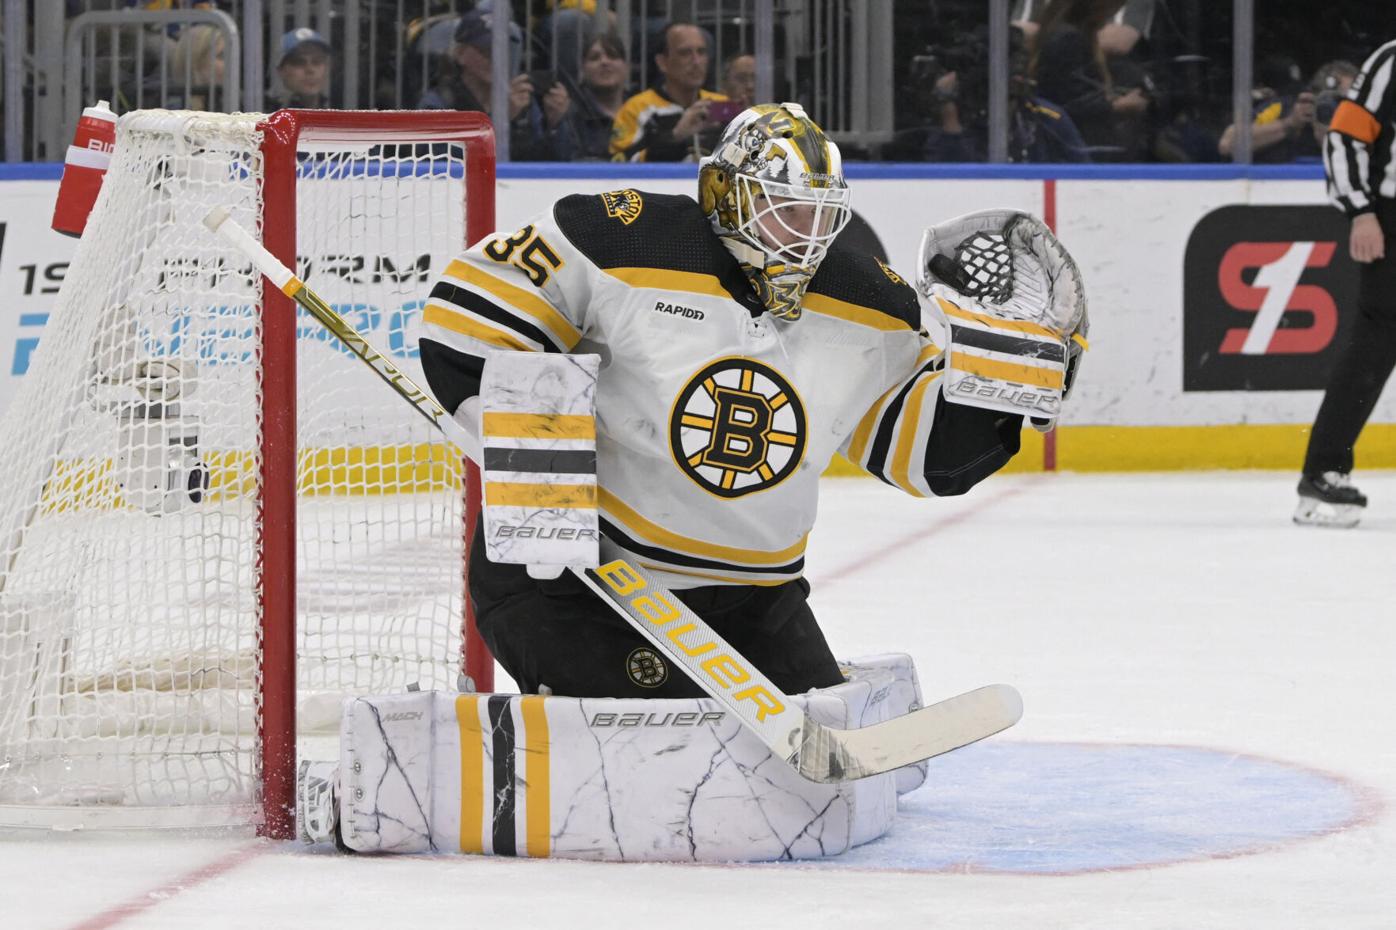 For Bruins goalies Jeremy Swayman and Linus Ullmark, success means